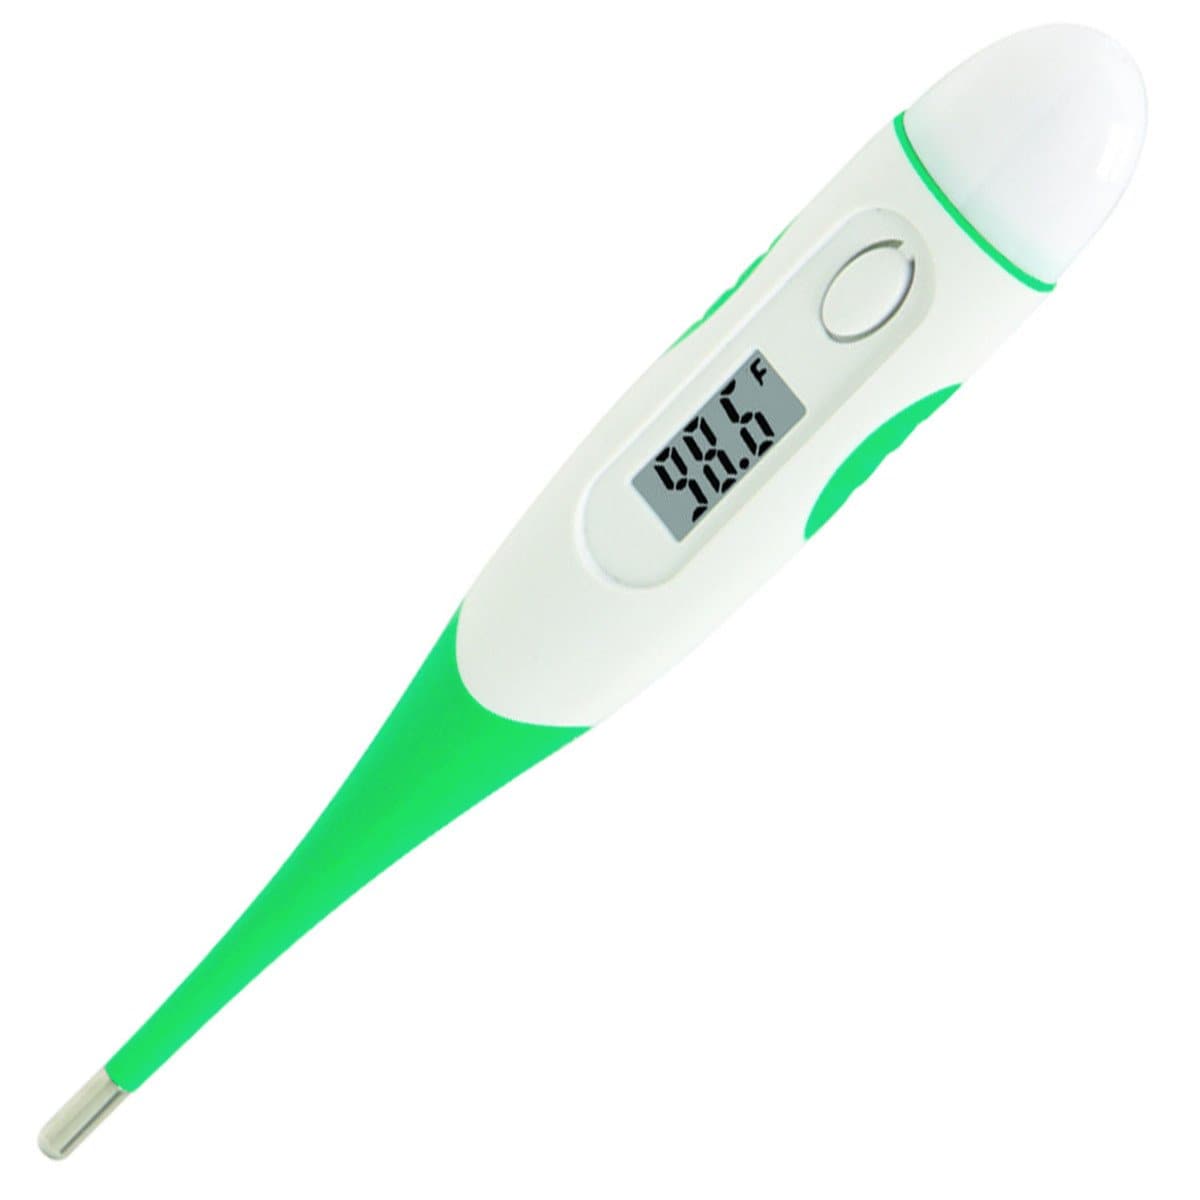 Mabis Clinically Accurate Digital Thermometer with Storage Case